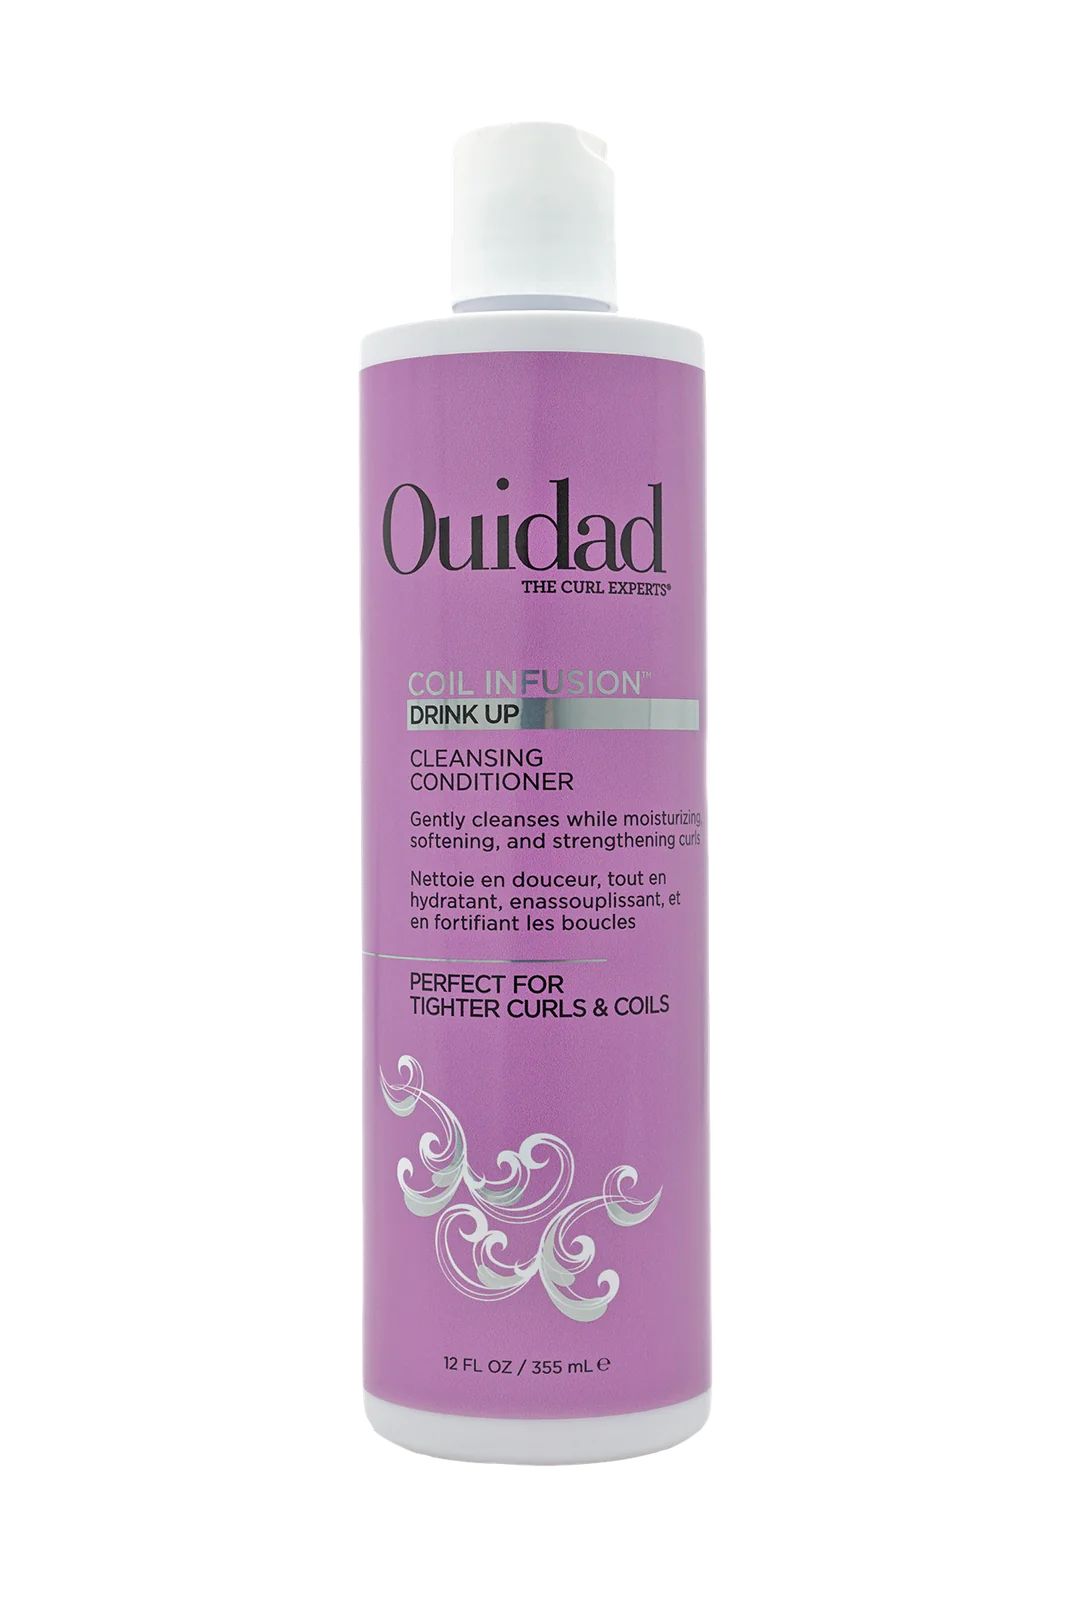 Coil Infusion® Drink Up™ Cleansing Conditioner | Ouidad